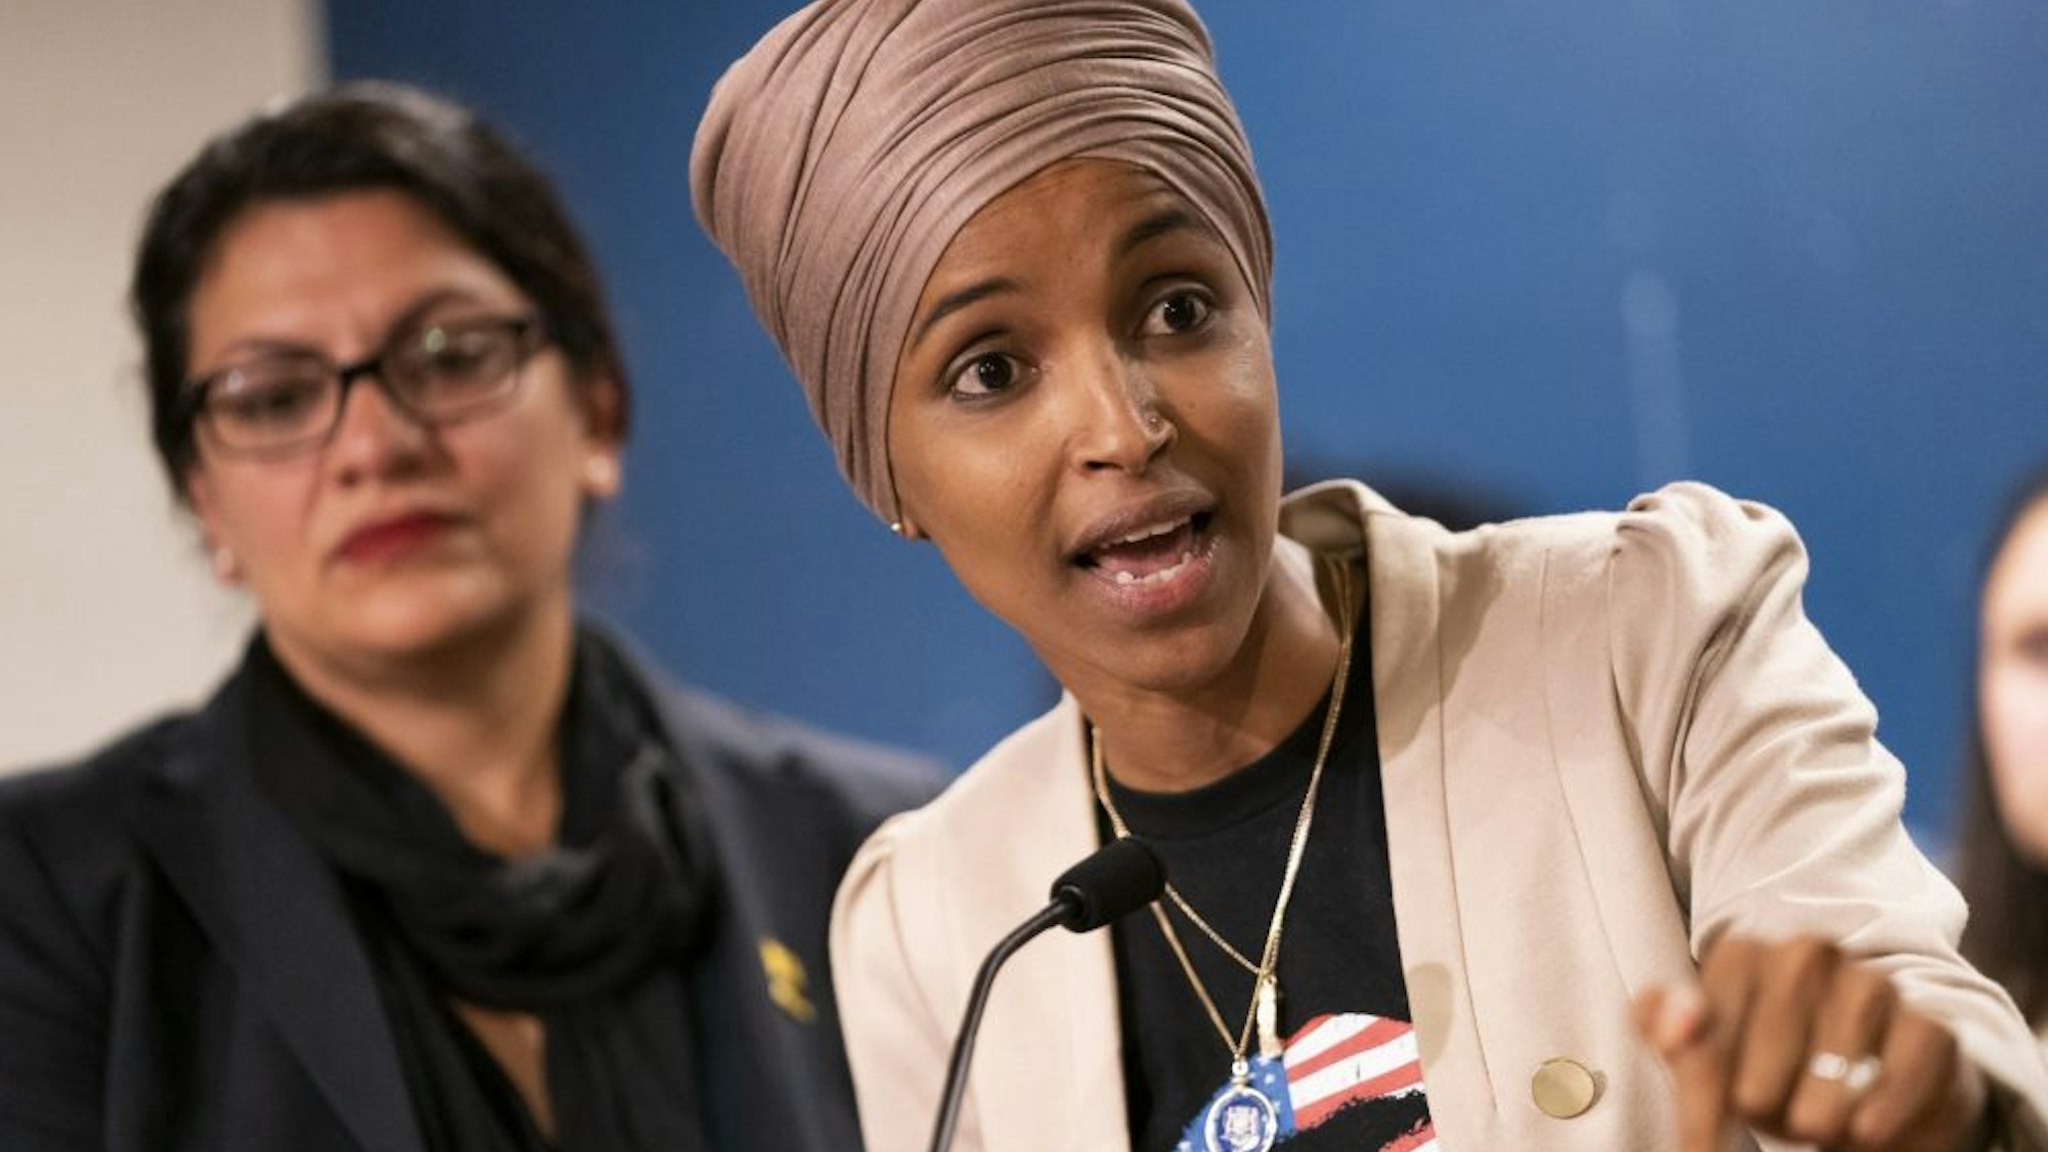 St. Paul, MN-August 19: Rep. Ilhan Omar, with Rep. Rashida Tlaib at her side, spoke at a press conference at the State Capitol.